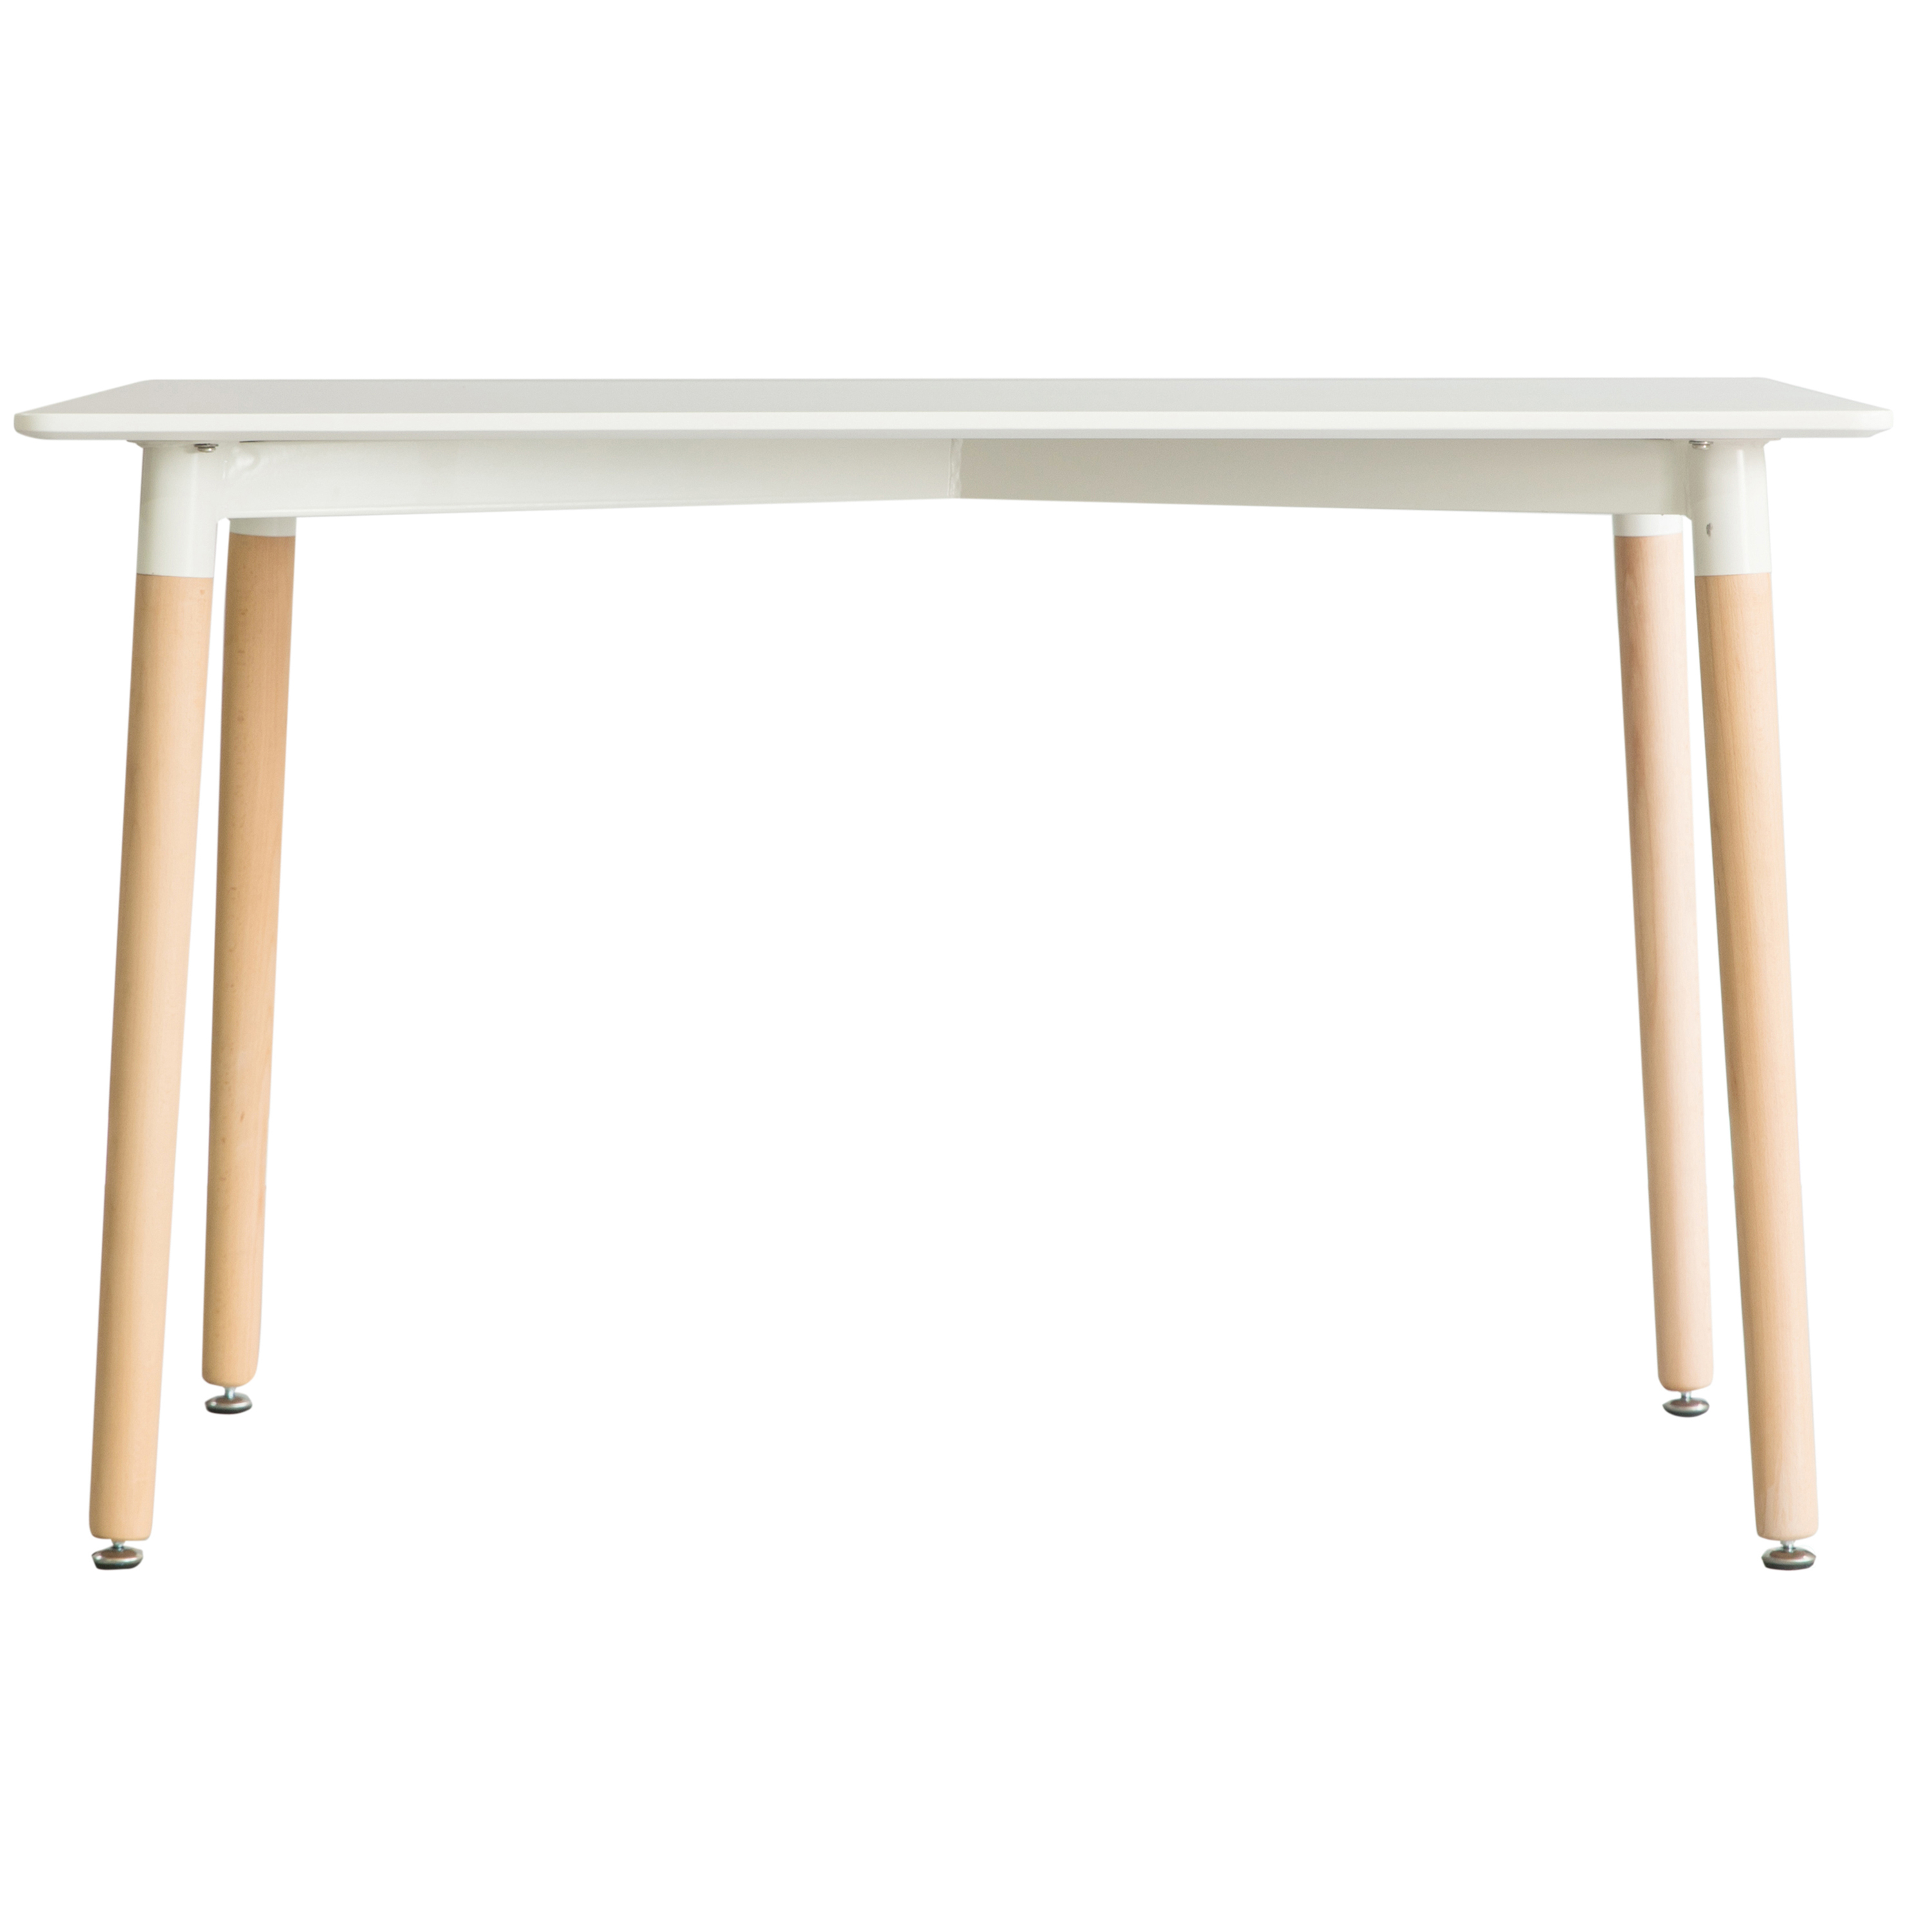 Mid-Century Modern Rectangular 4 Ft. Dining Table With White Tabletop And Solid Beech Wood Legs